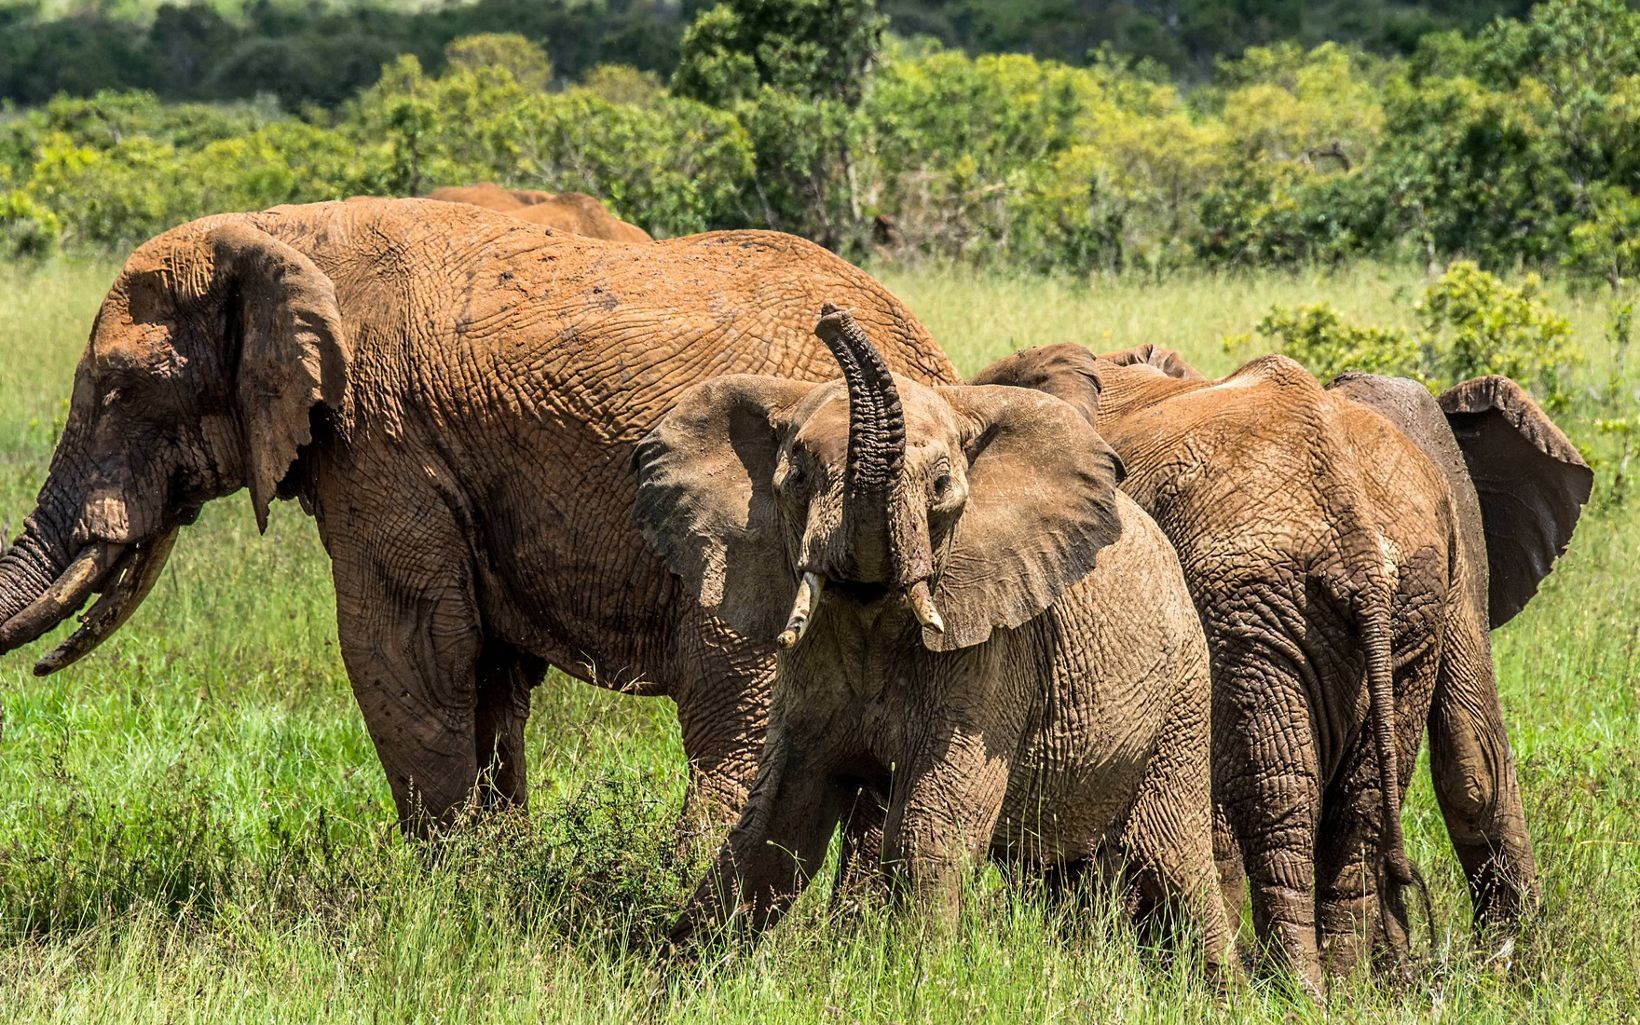 Big Eaters An elephant spends the majority of its day eating—16 hours, to be exact! Elephants are herbivores and can consume up to 300 pounds of food in a single day. © Ami Vitale